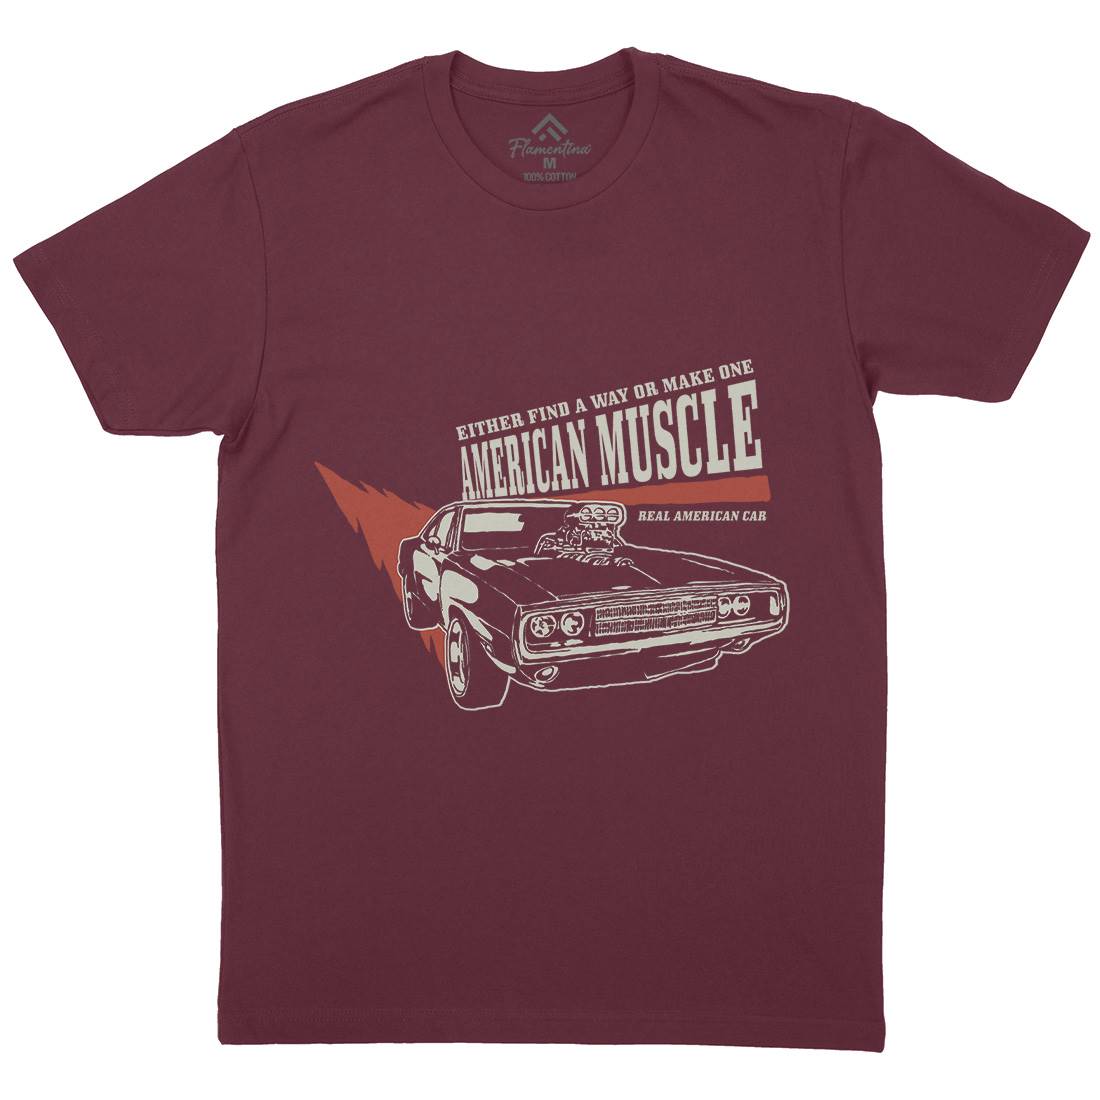 American Muscle Mens Organic Crew Neck T-Shirt Cars A402